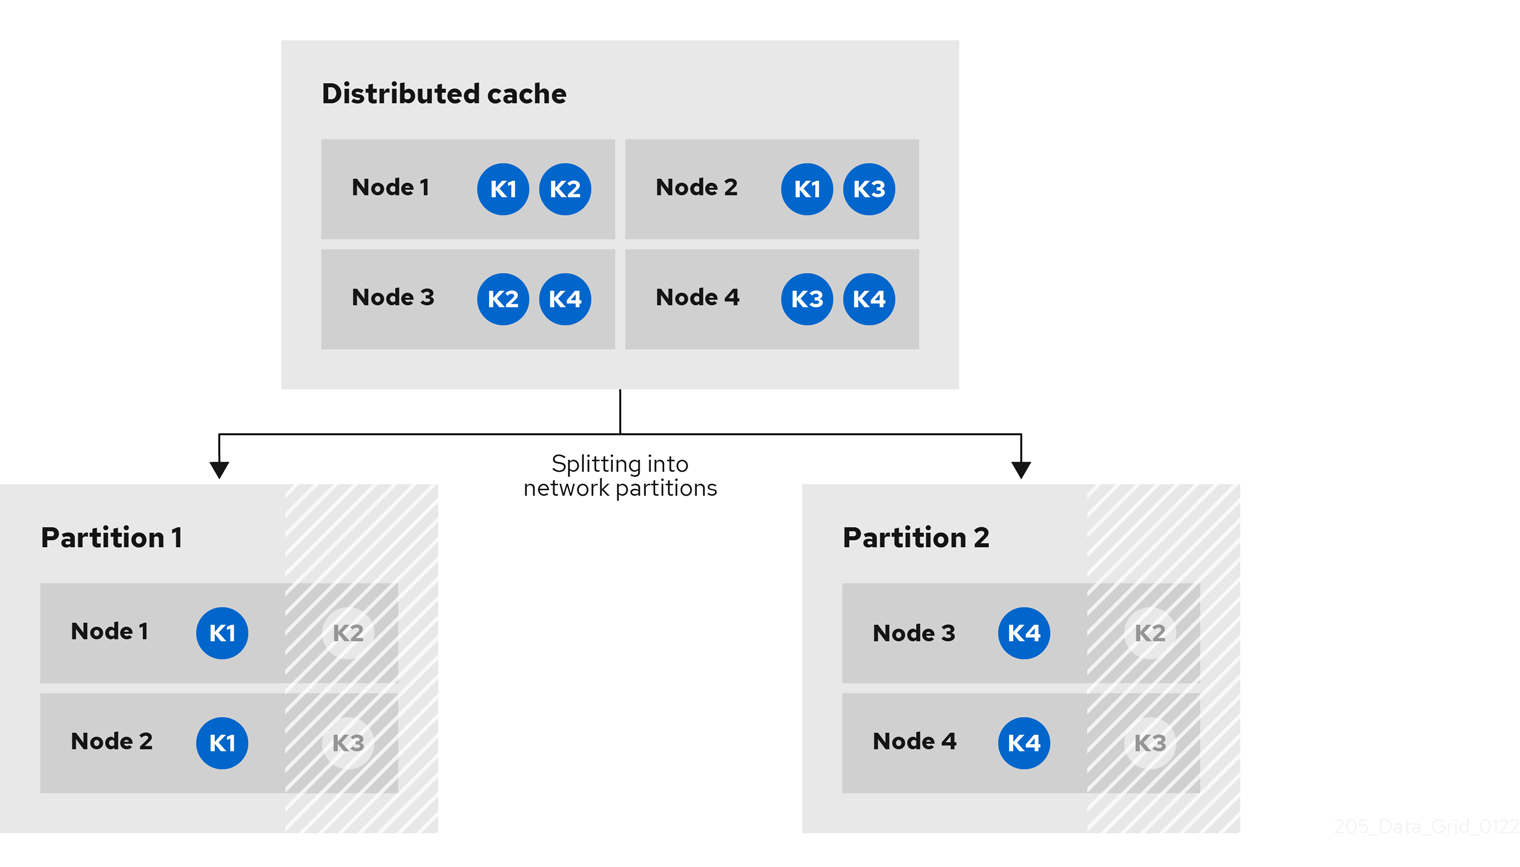 Distributed cache enters network partition